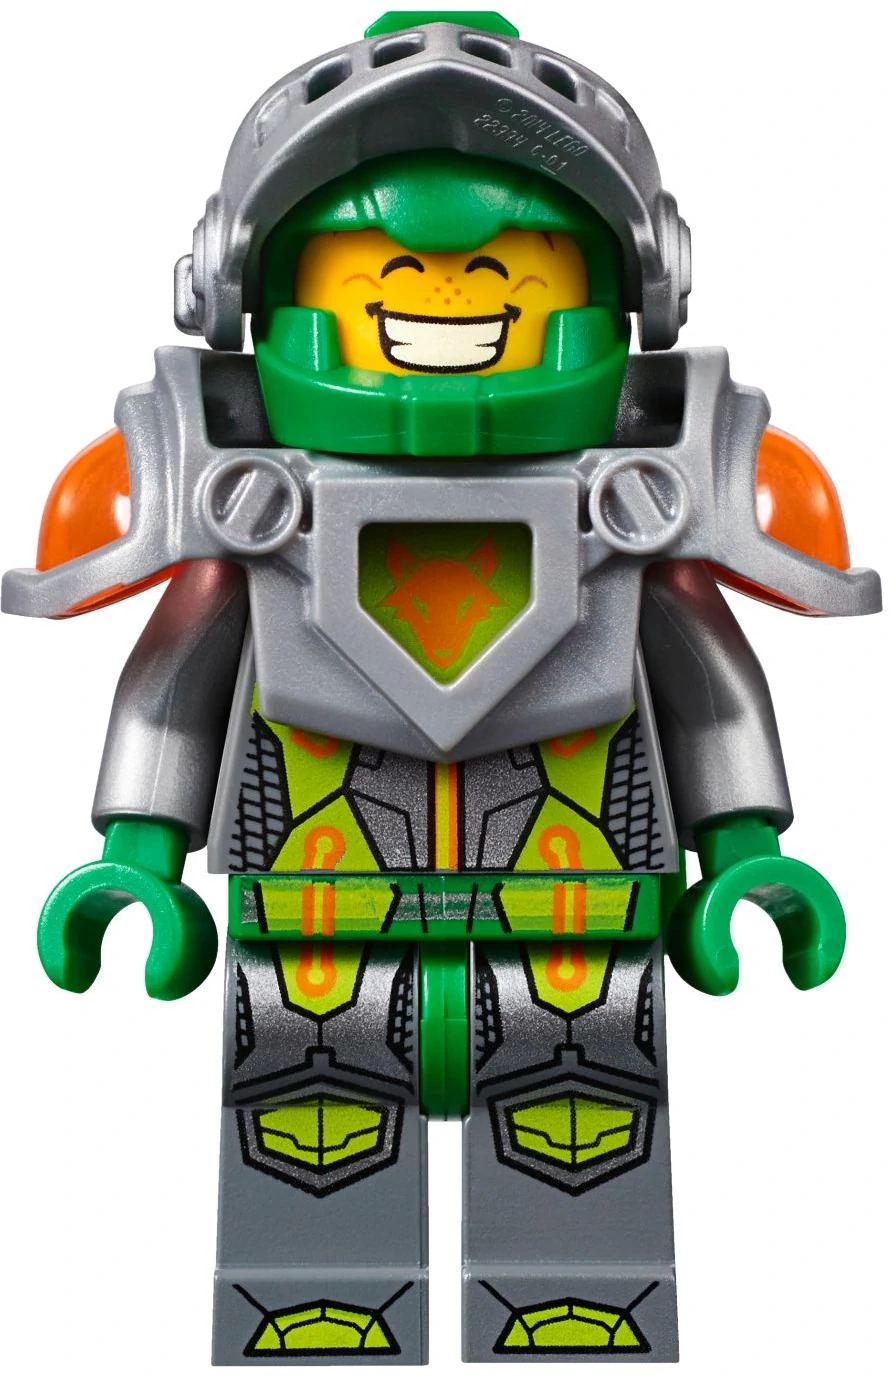 https://static.wikia.nocookie.net/lego/images/c/c2/NexoKnights_Aaron.png/revision/latest/scale-to-width-down/896?cb=20230507044953